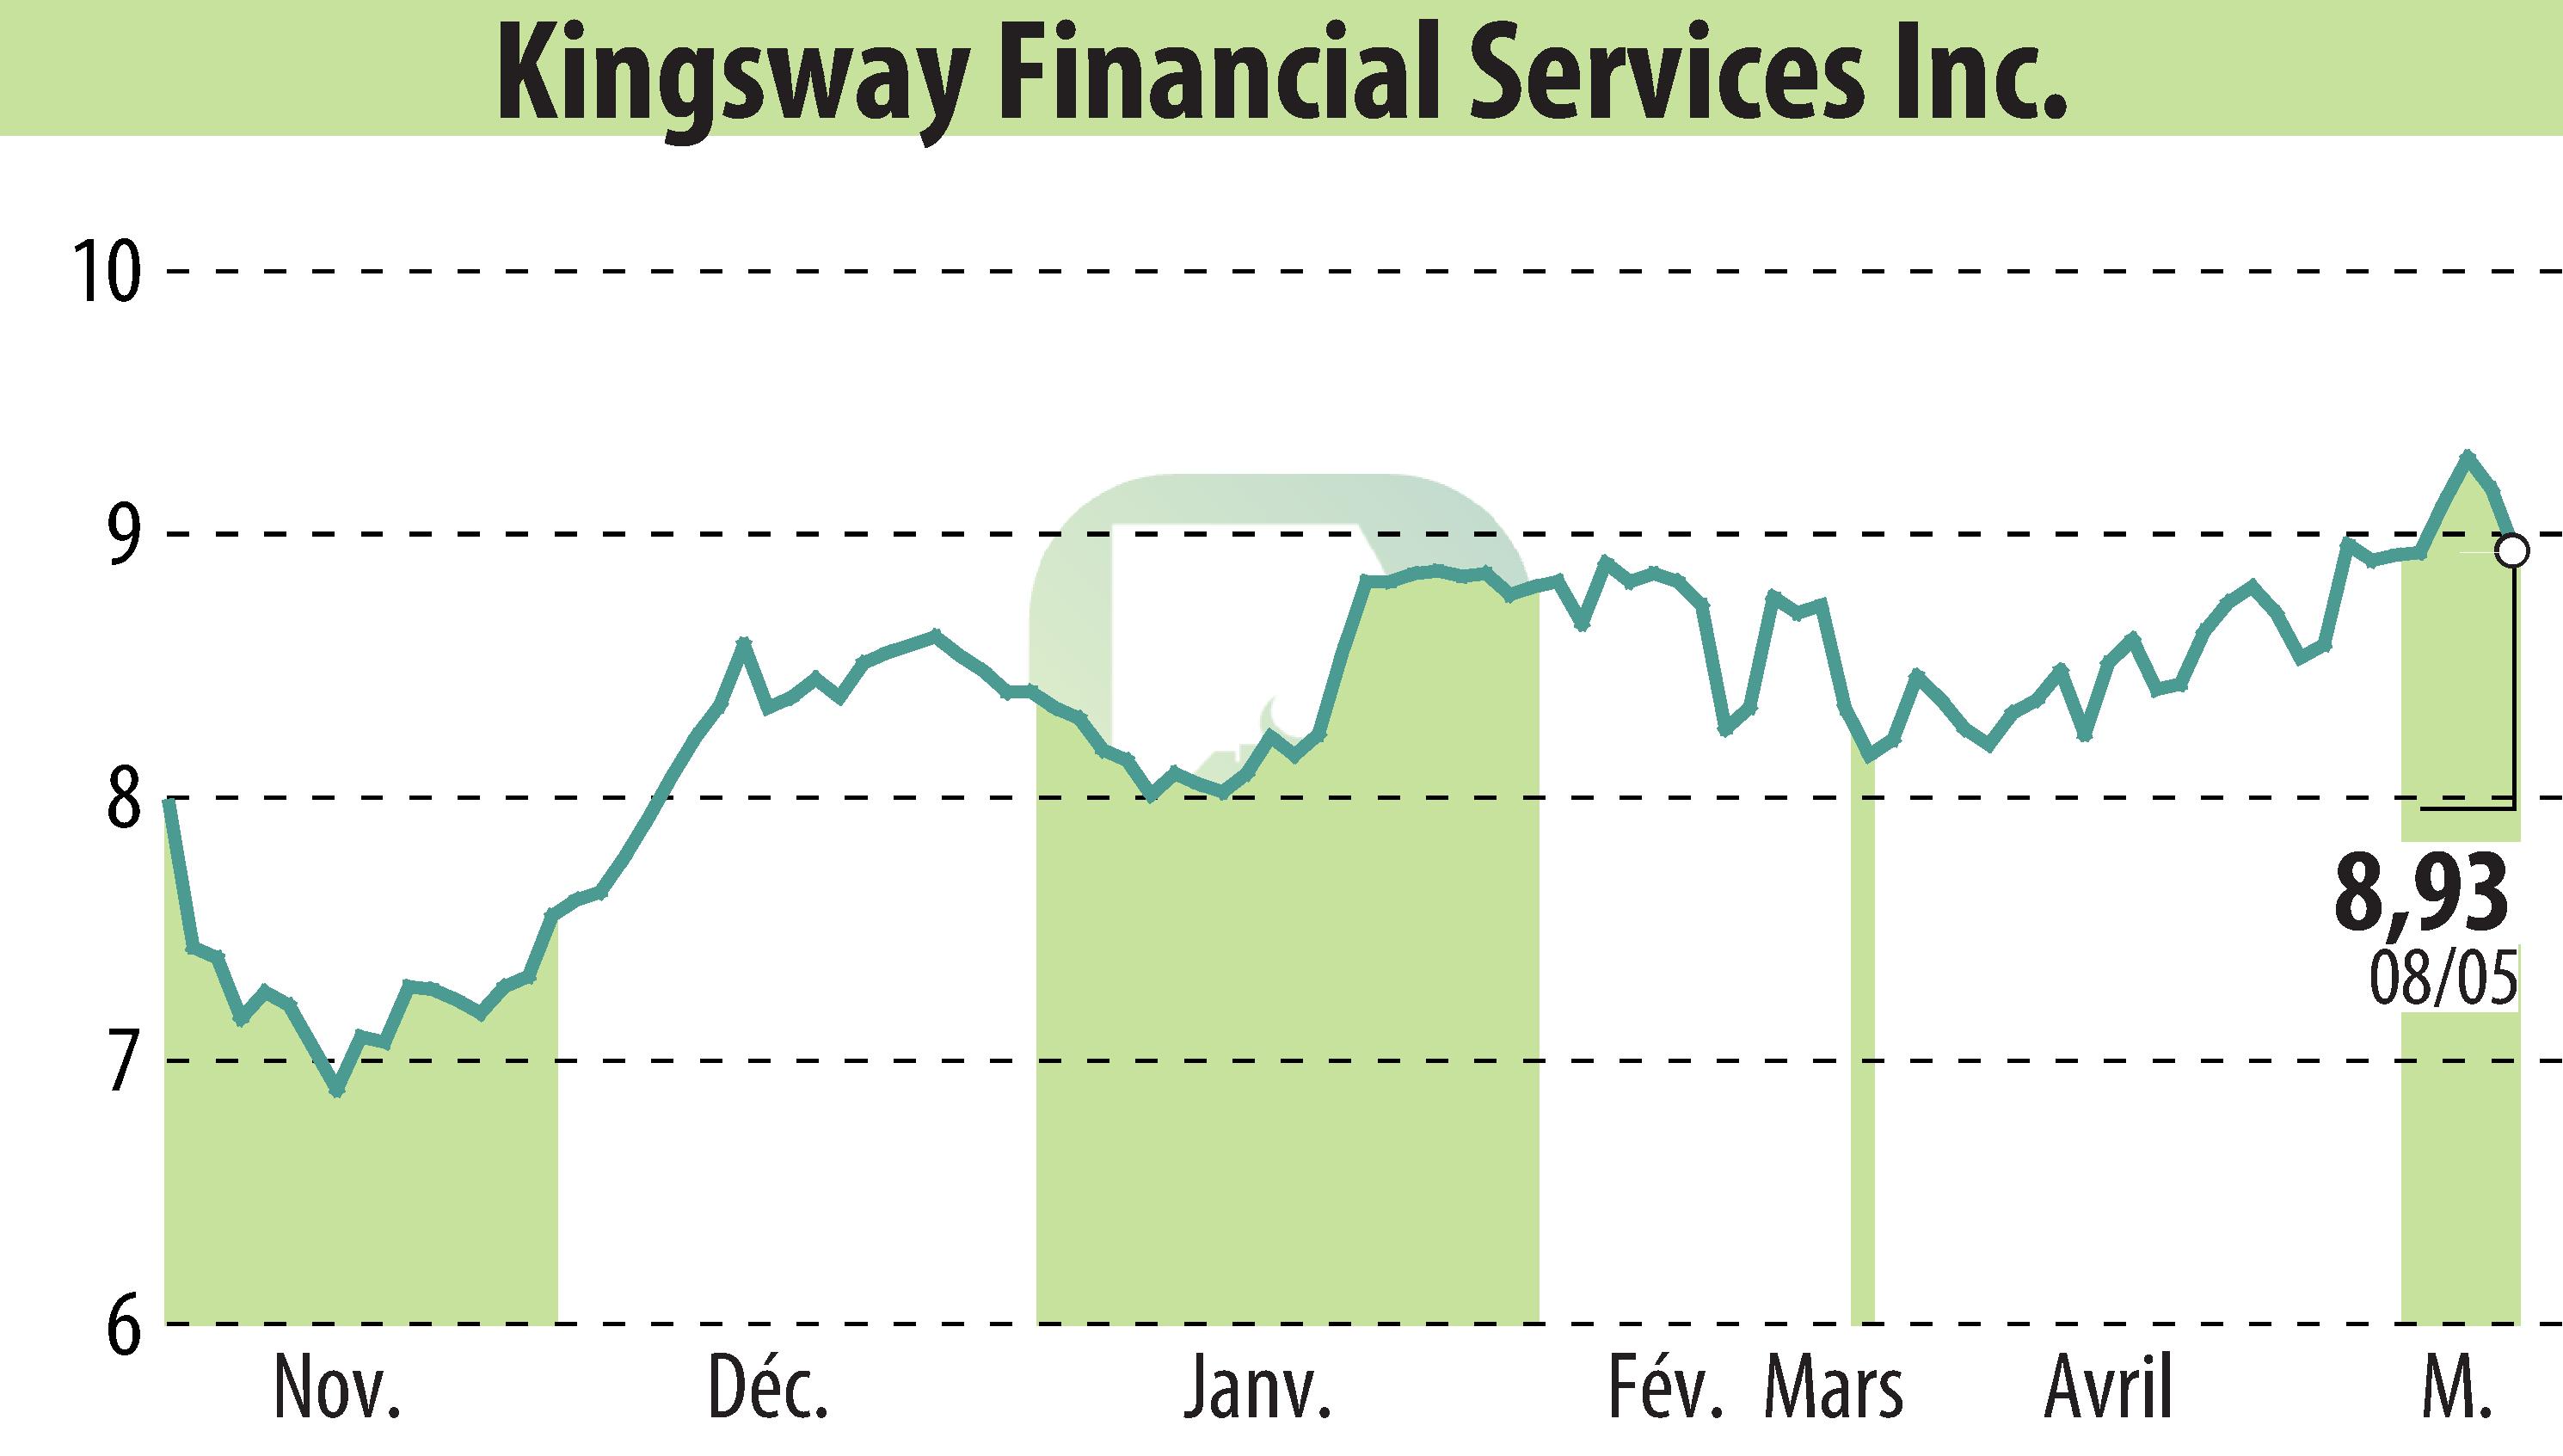 Stock price chart of Kingsway Financial Services, Inc. (EBR:KFS) showing fluctuations.